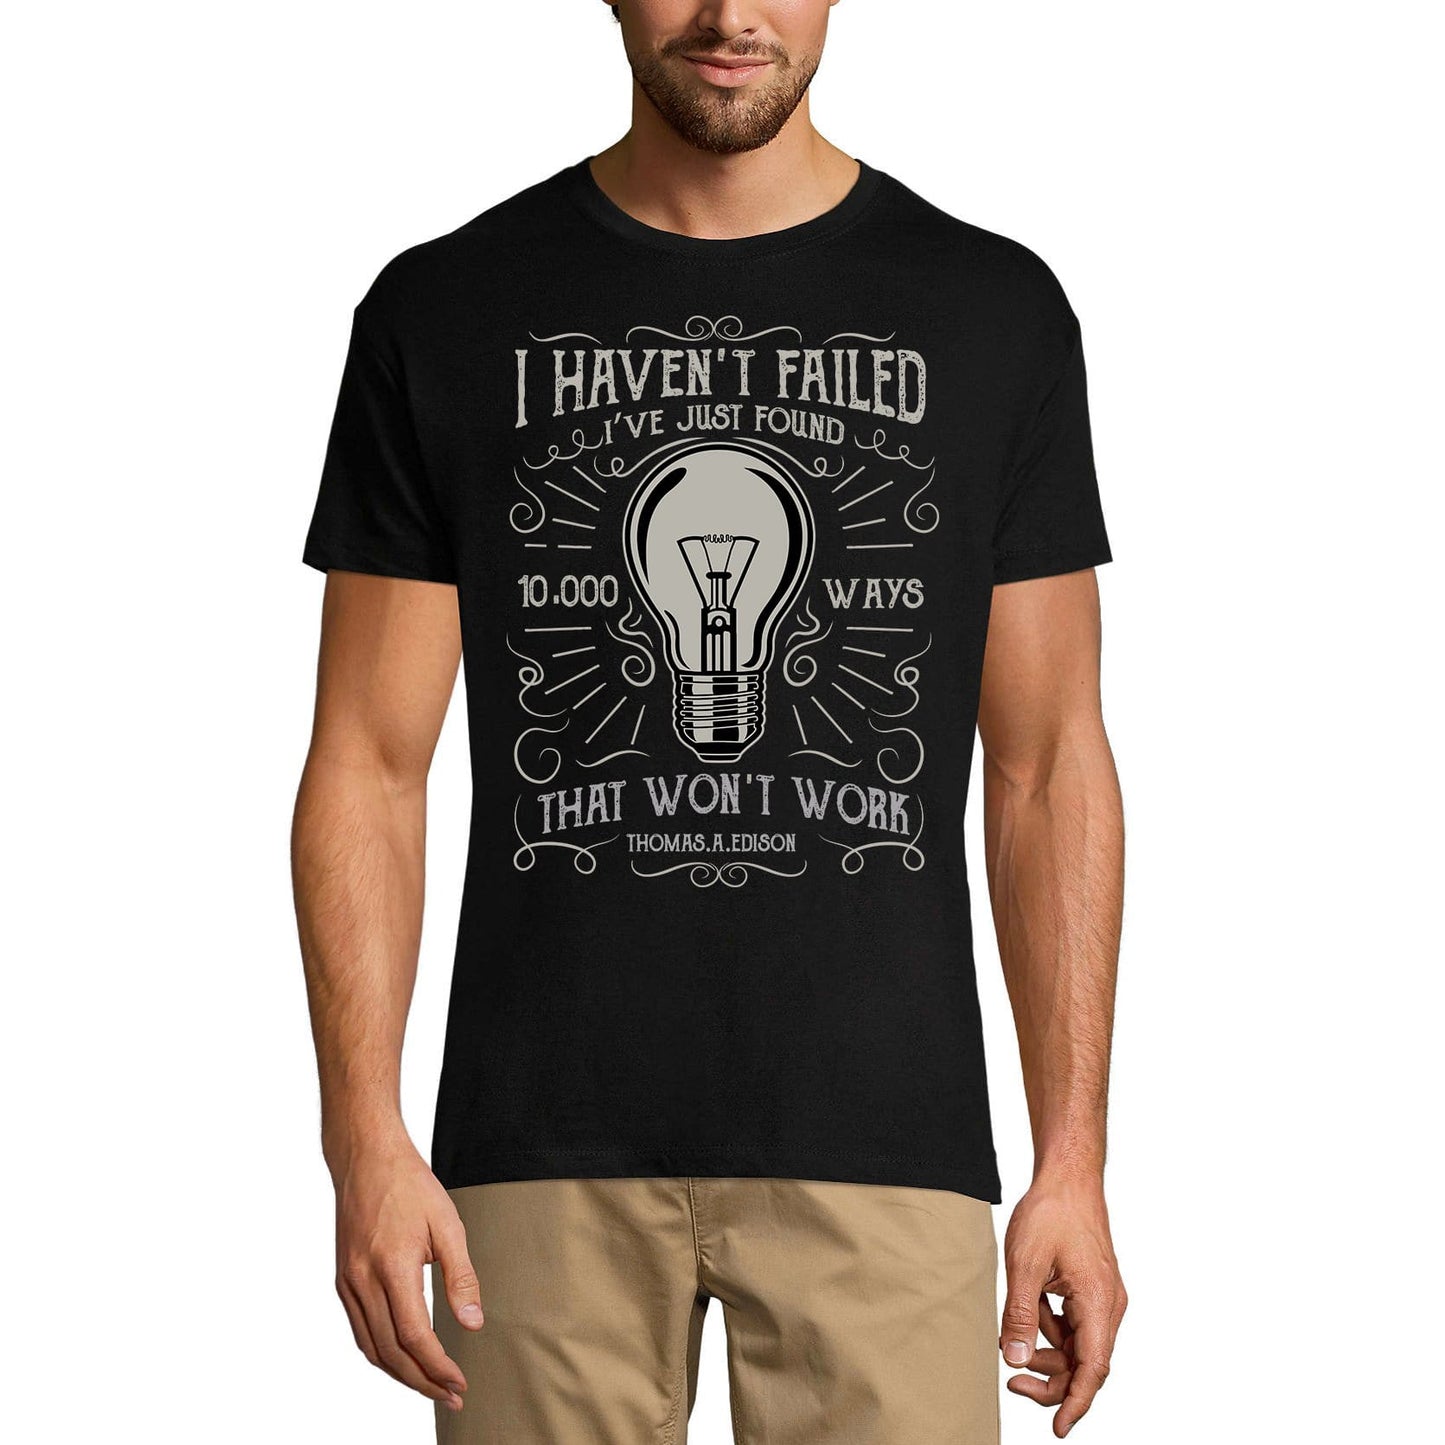 ULTRABASIC Men's T-Shirt I Haven't Failed I Just Found 10.000 Ways That Don't Work - Thomas Edison Quote Shirt